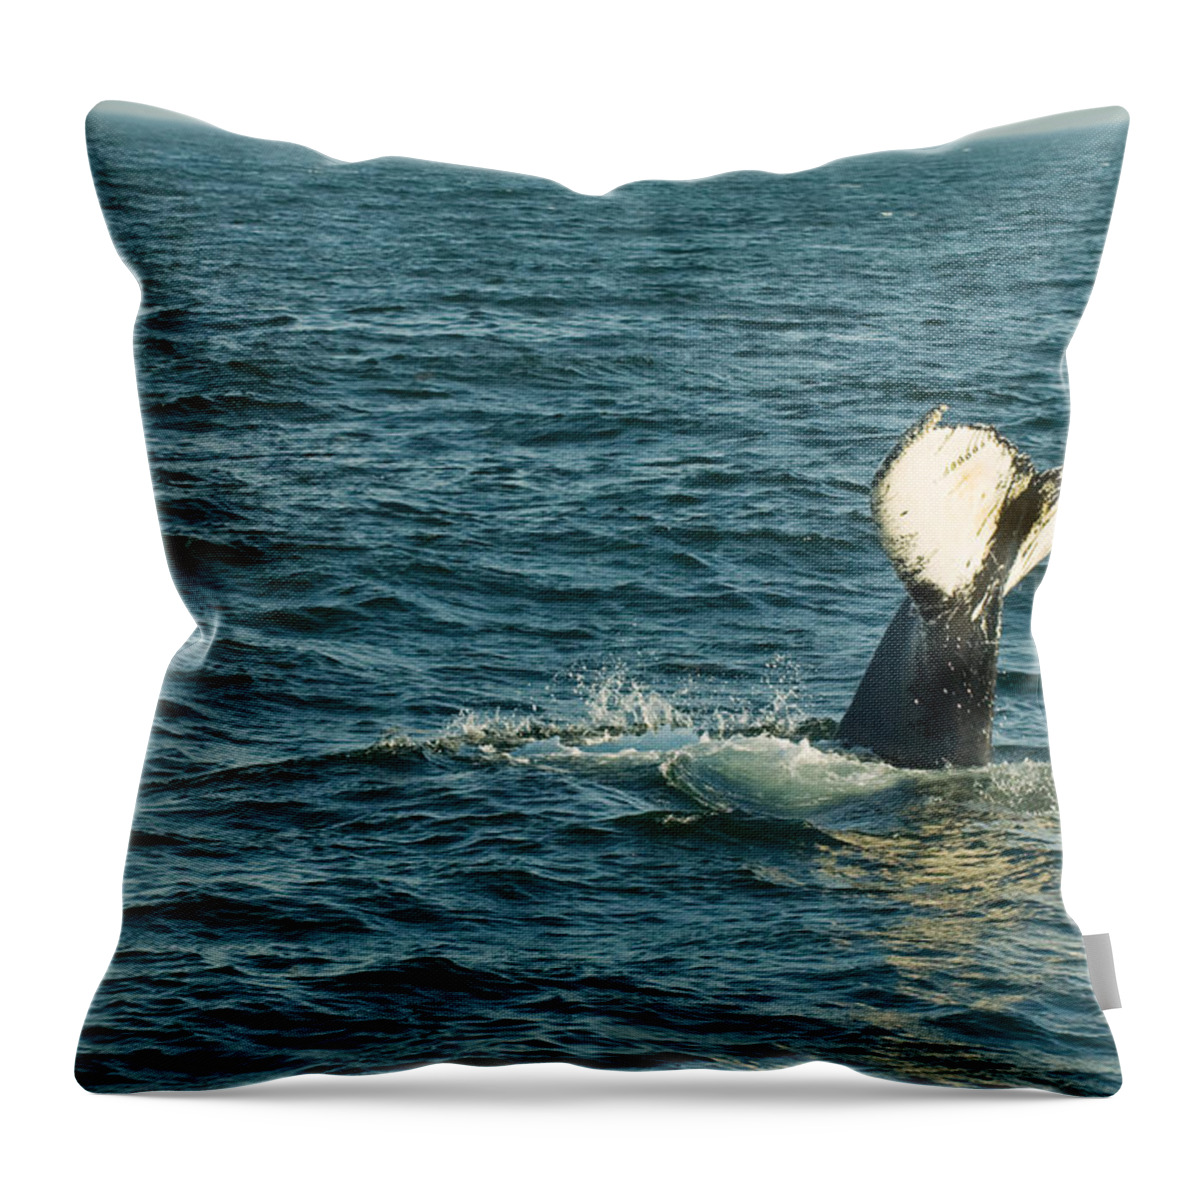 Whale Throw Pillow featuring the photograph Whale by Sebastian Musial